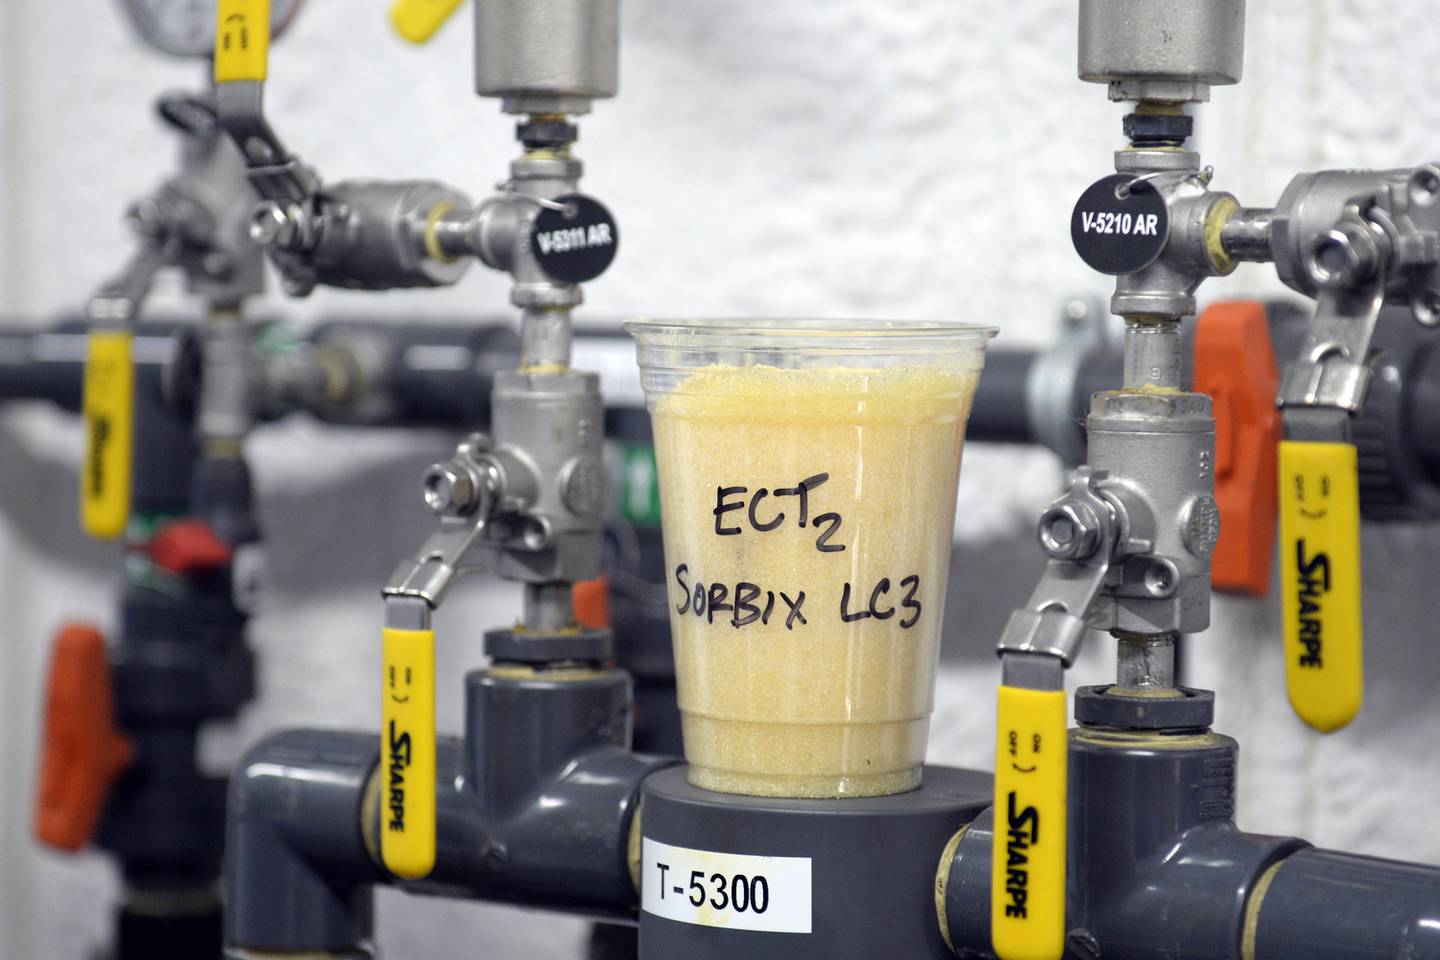 A cup full of single-use, ion-exchange, gel-based media sits atop valves that control a ground water remediation system being used to remediate polyfluoroalkyl substances (PFAS) from groundwater at the fire training area of Wright-Patterson Air Force Base, Ohio on Sept. 29, 2020.